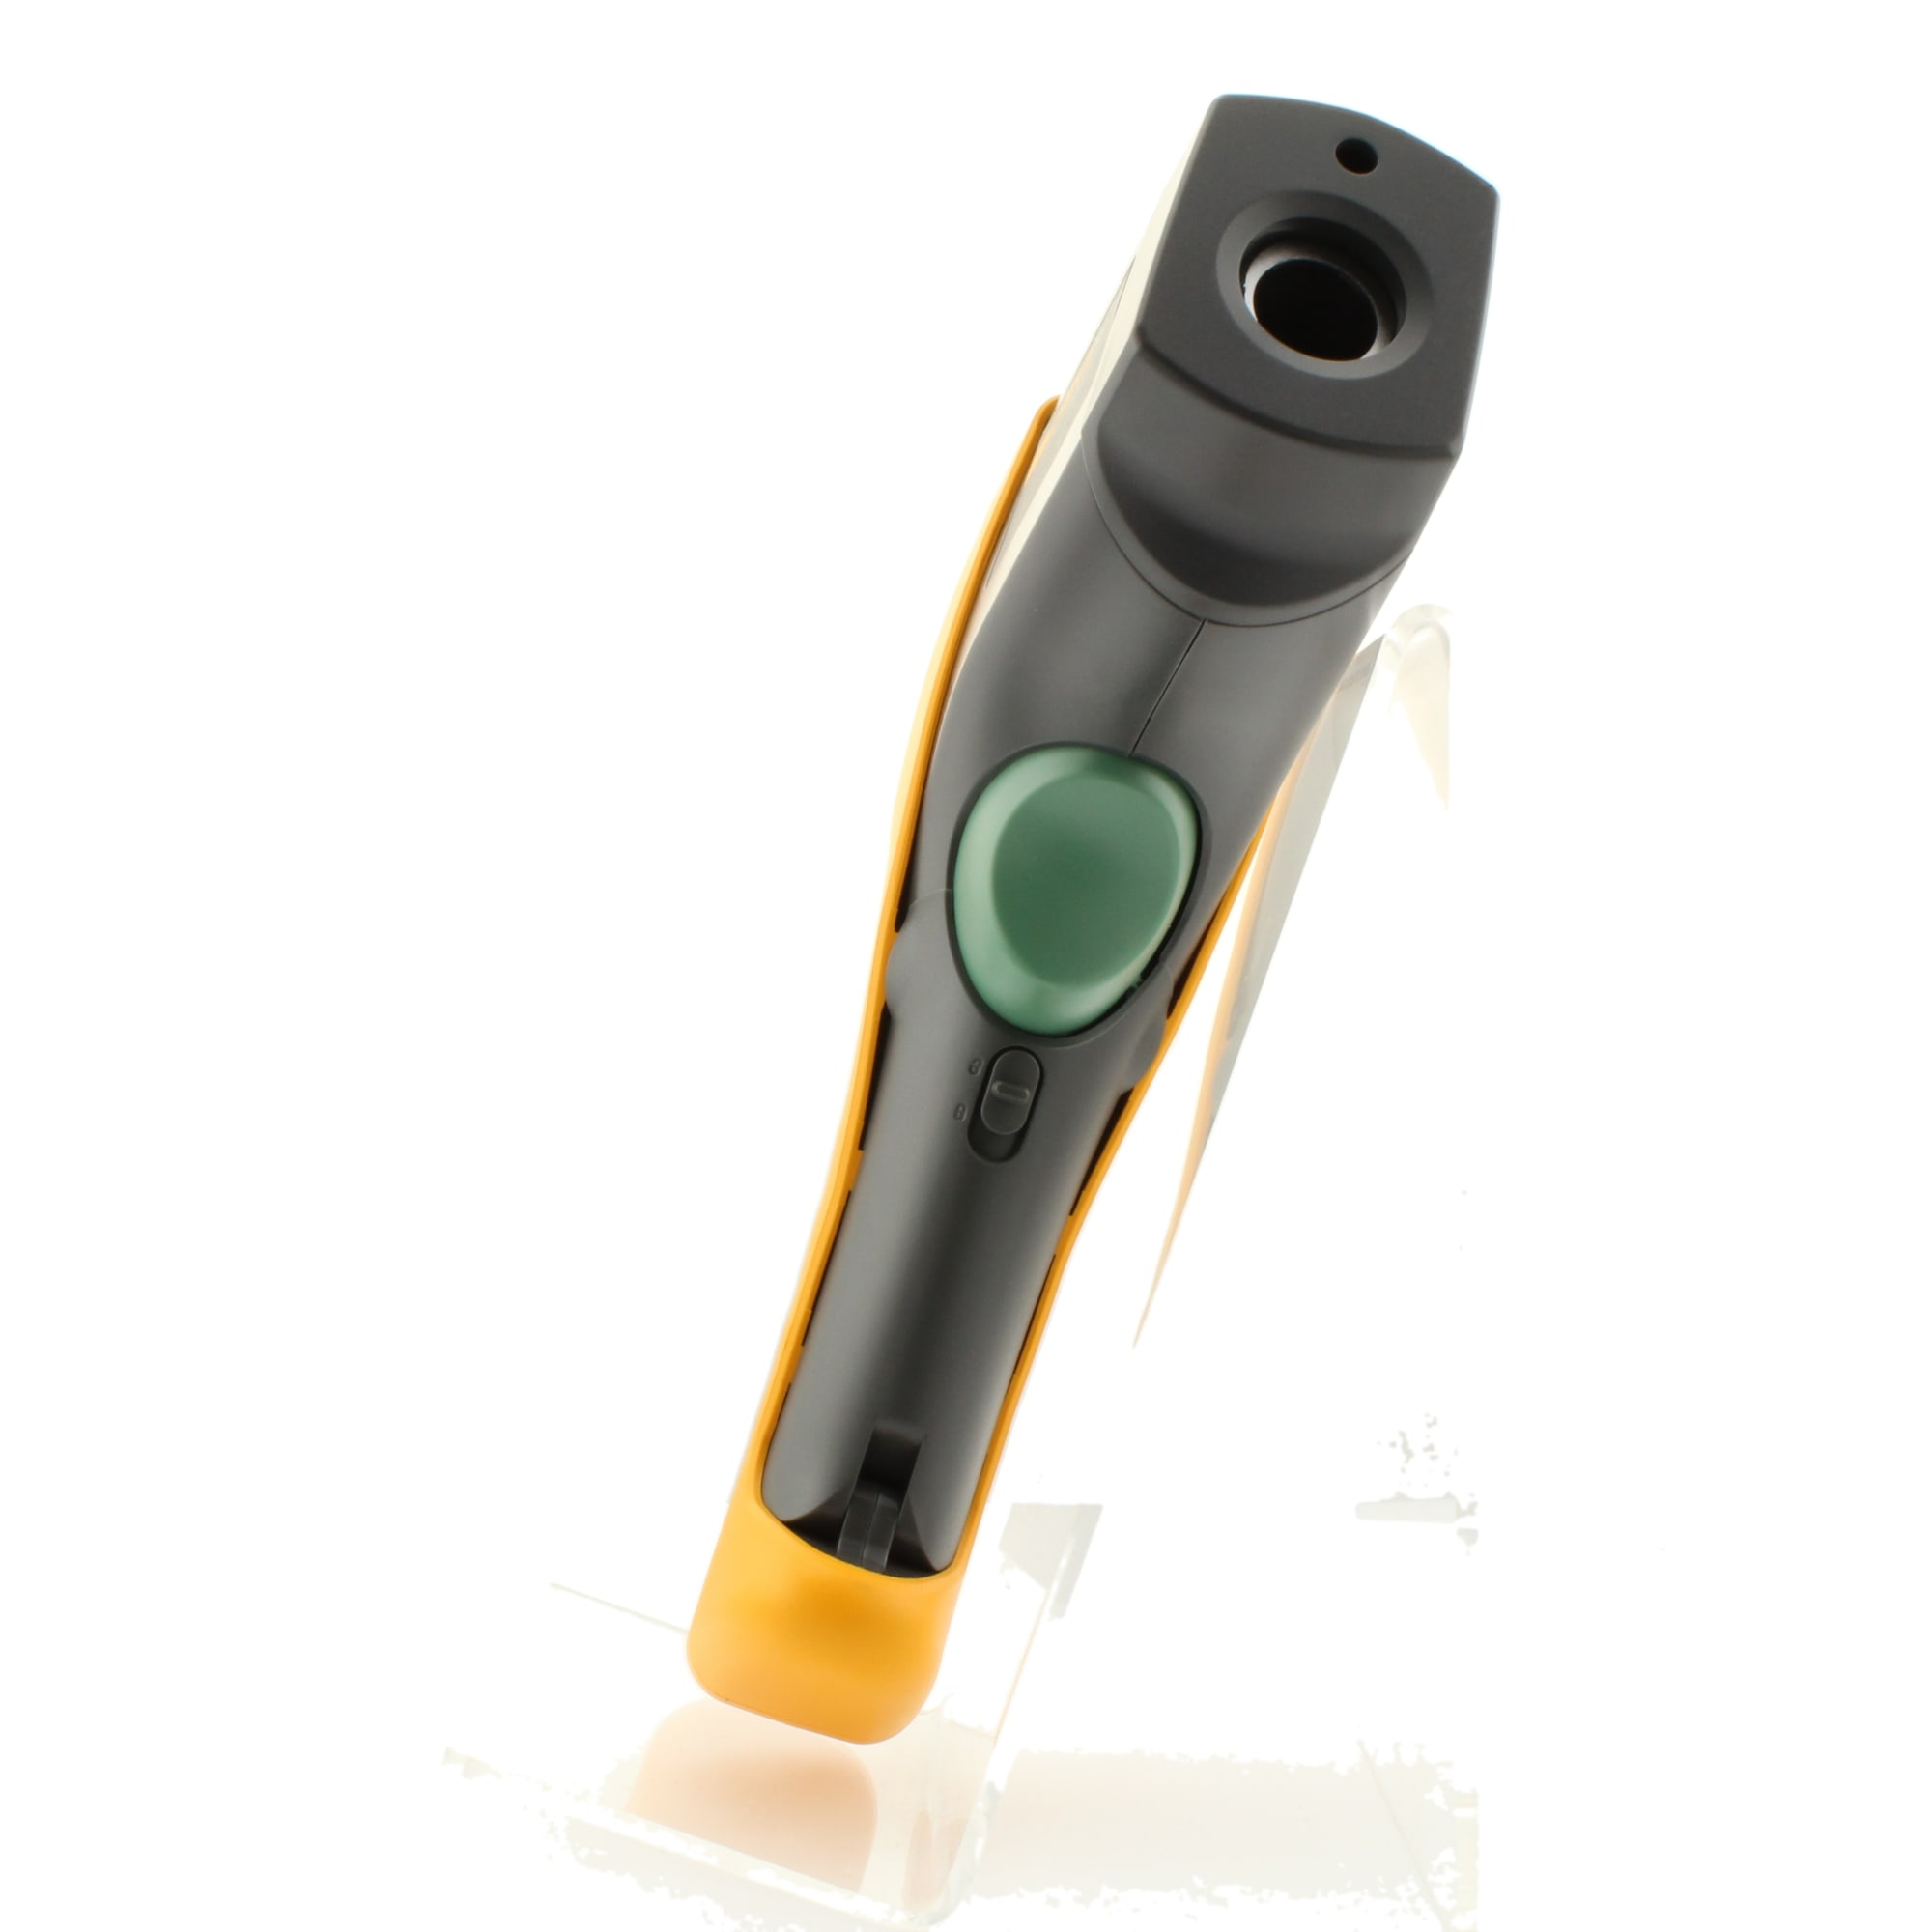 FLUKE 563 HVAC Infrared & Contact Thermometer – Industrial